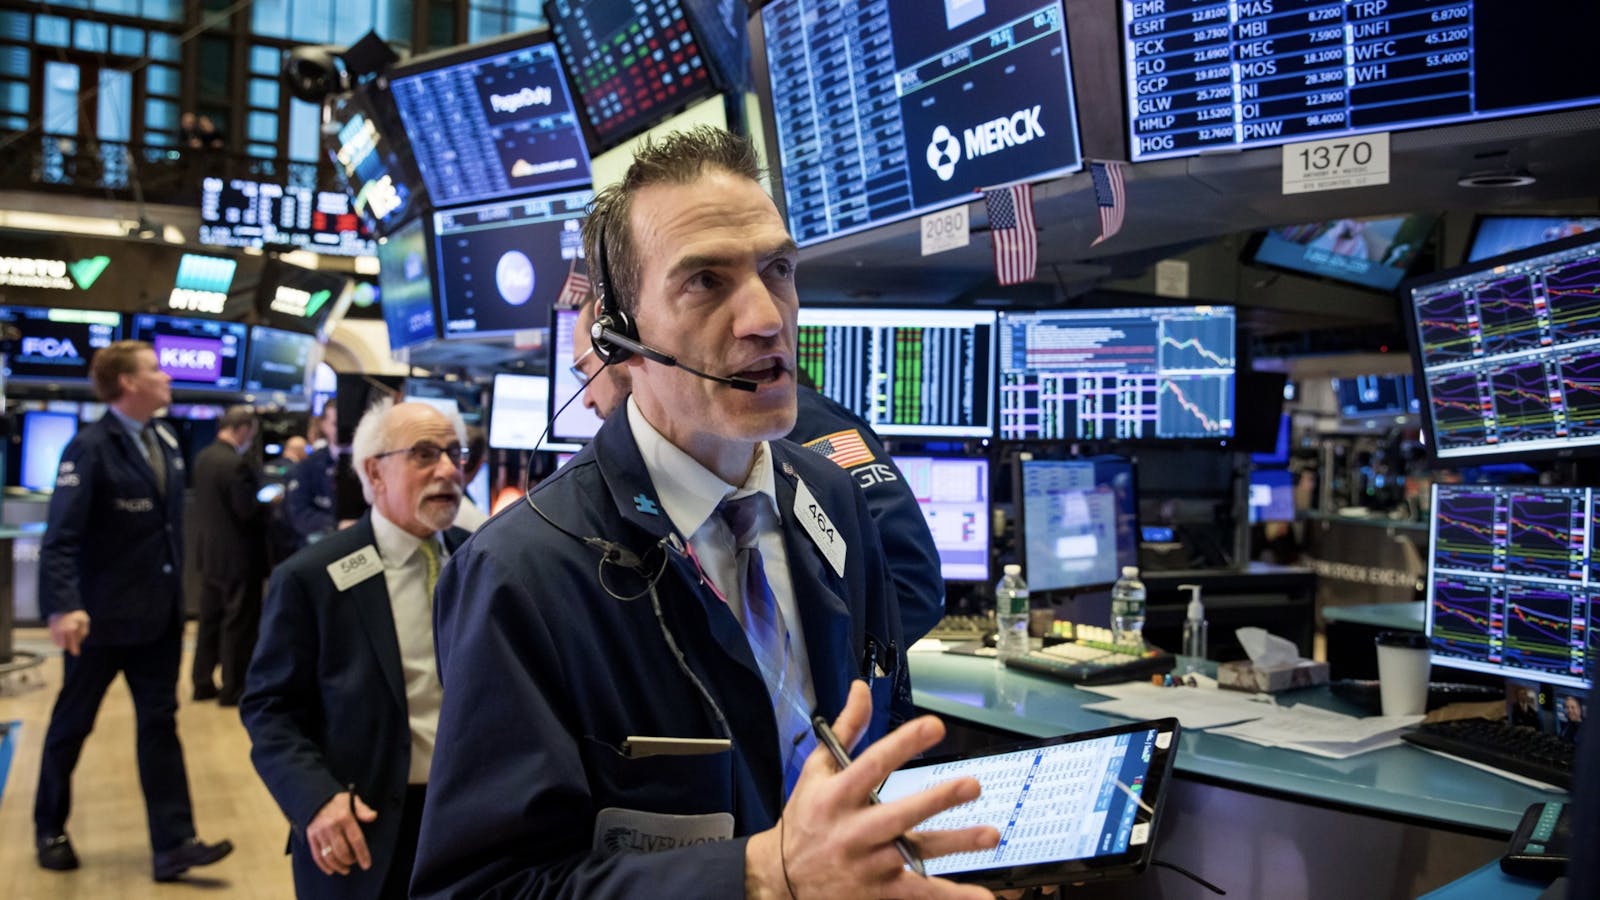 Traders on the floor of the New York Stock Exchange. Photo by Bloomberg